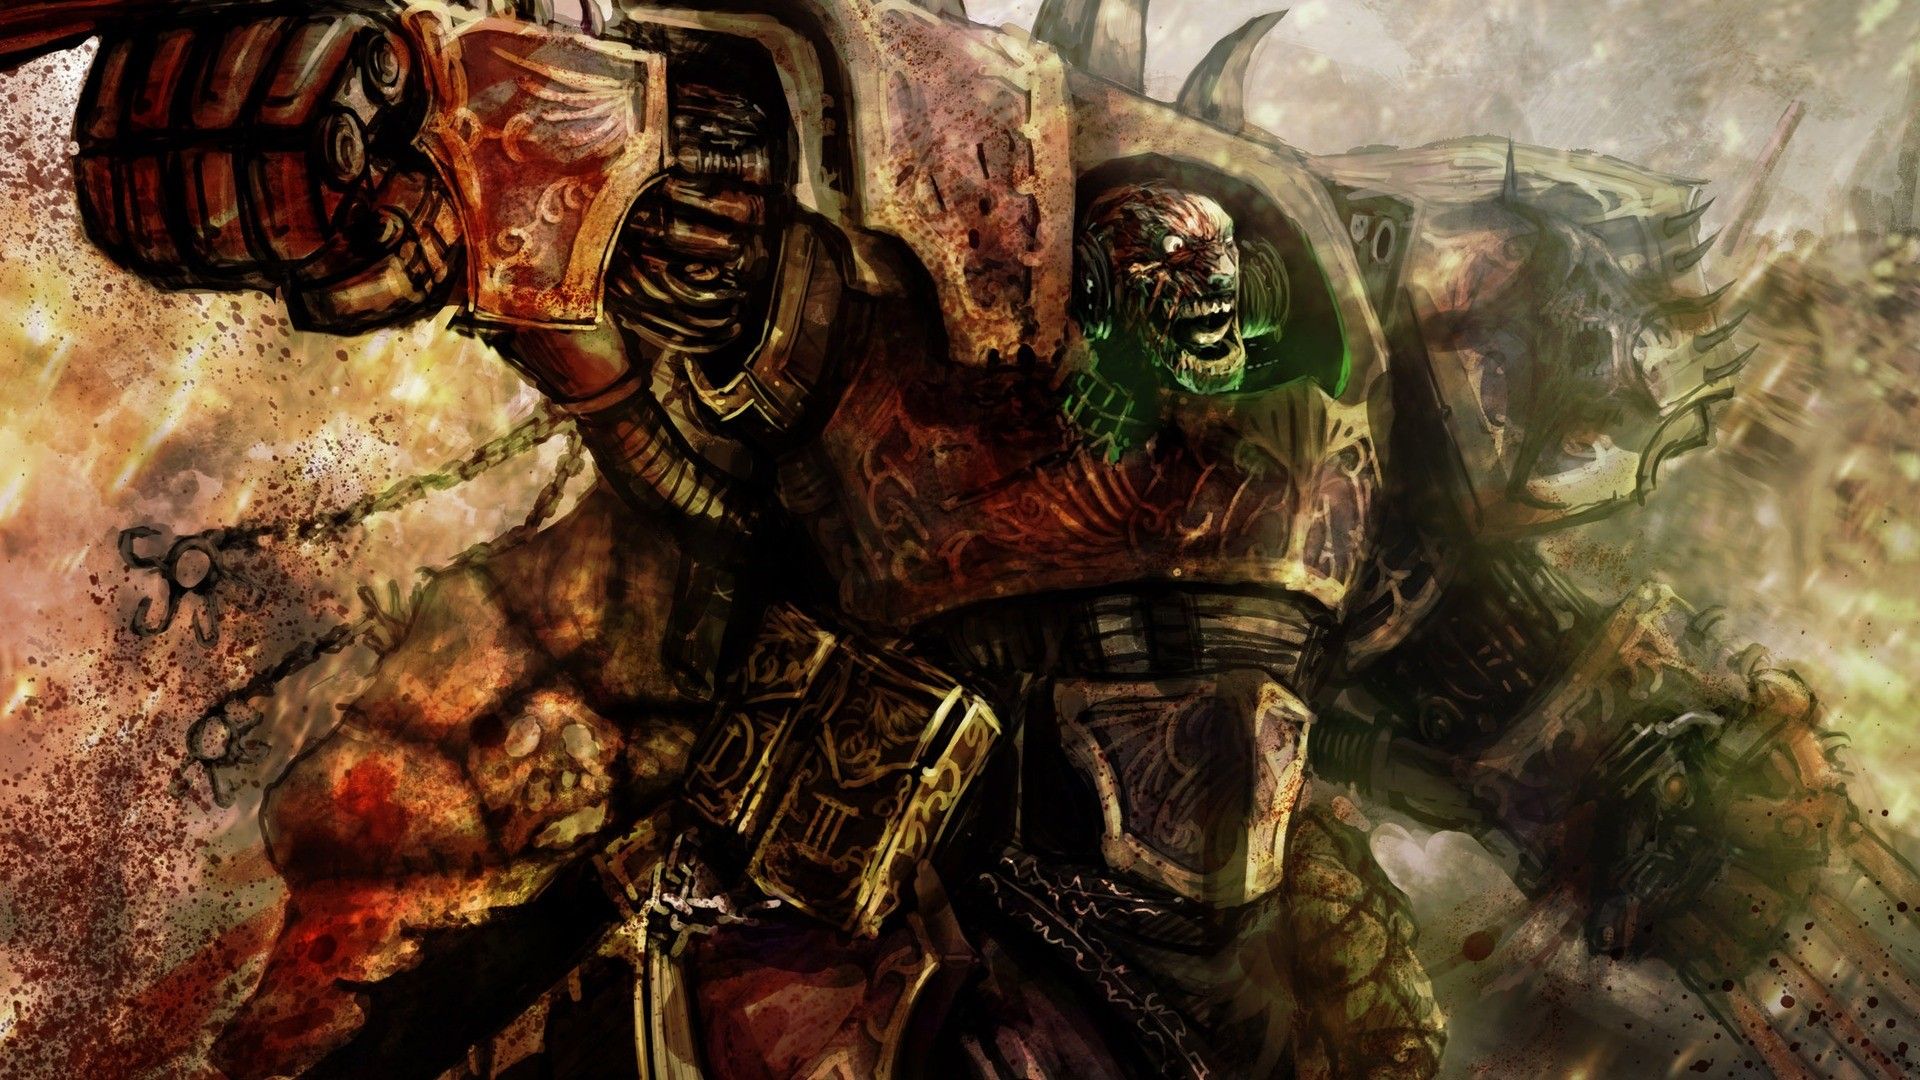 Free download Chaos Space Marine Wallpaper [1920x1080]